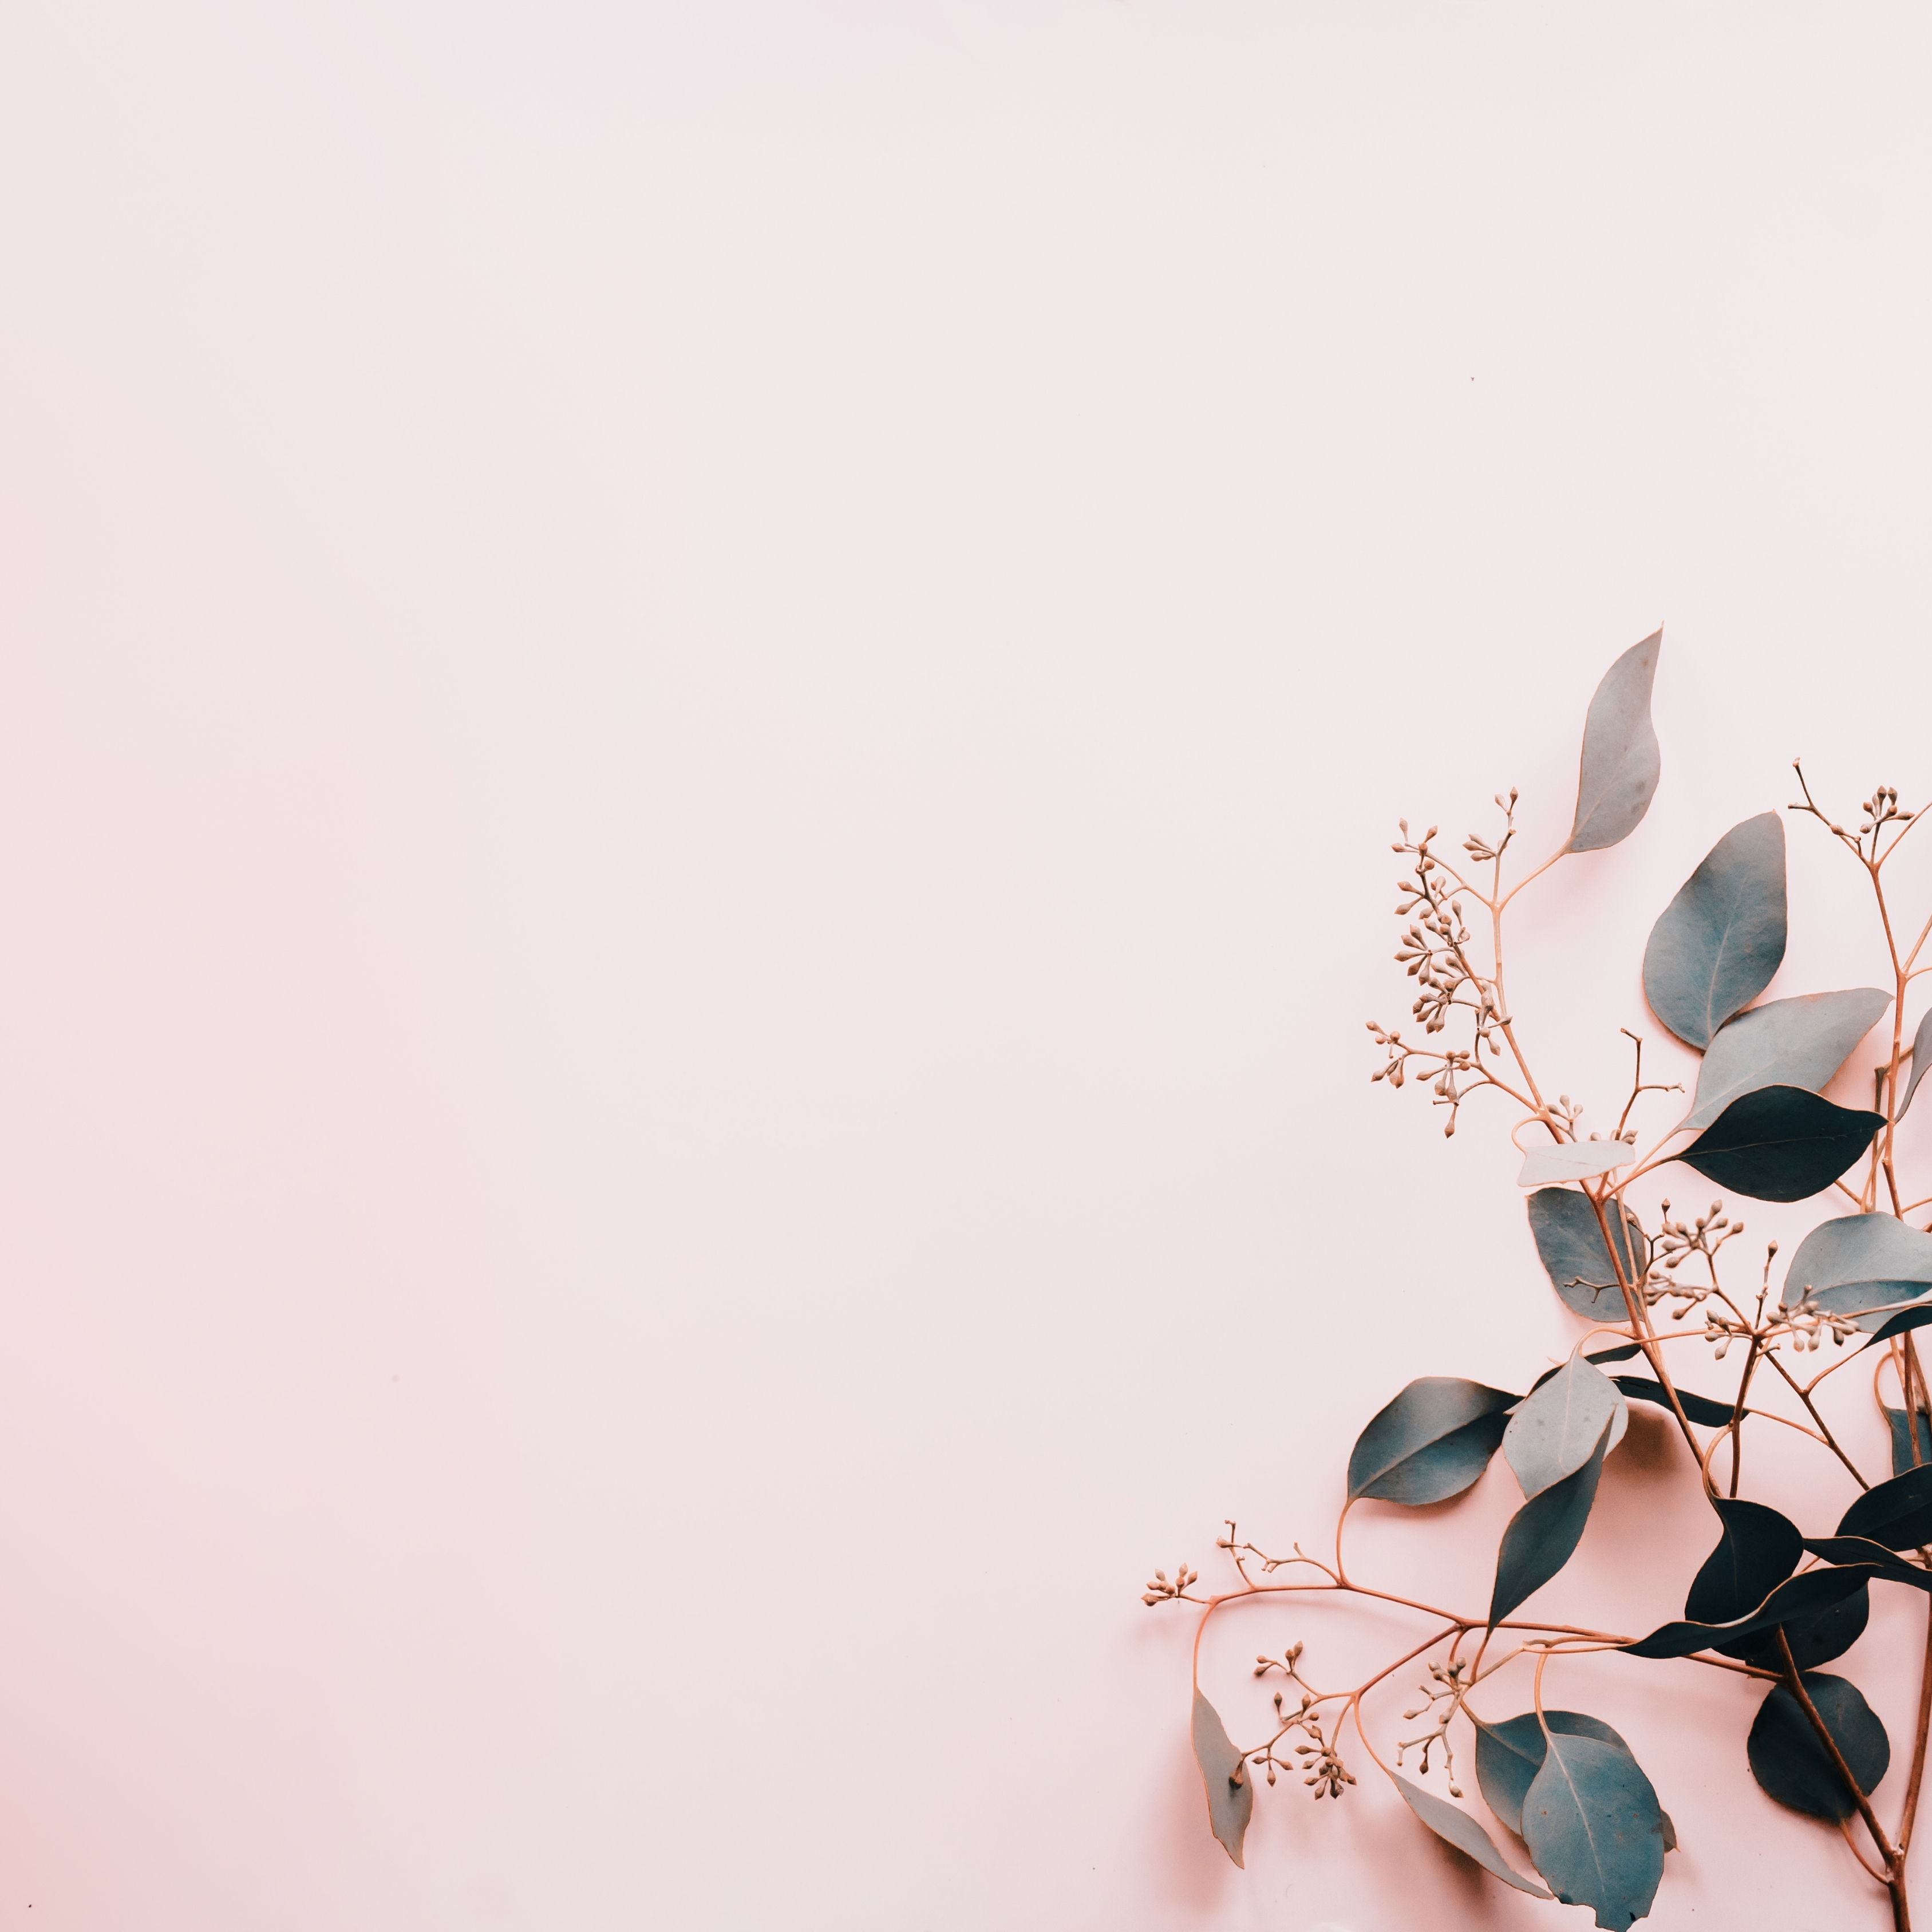 A corner frame of dried flowers and eucalyptus branches on a pale pink background - Simple